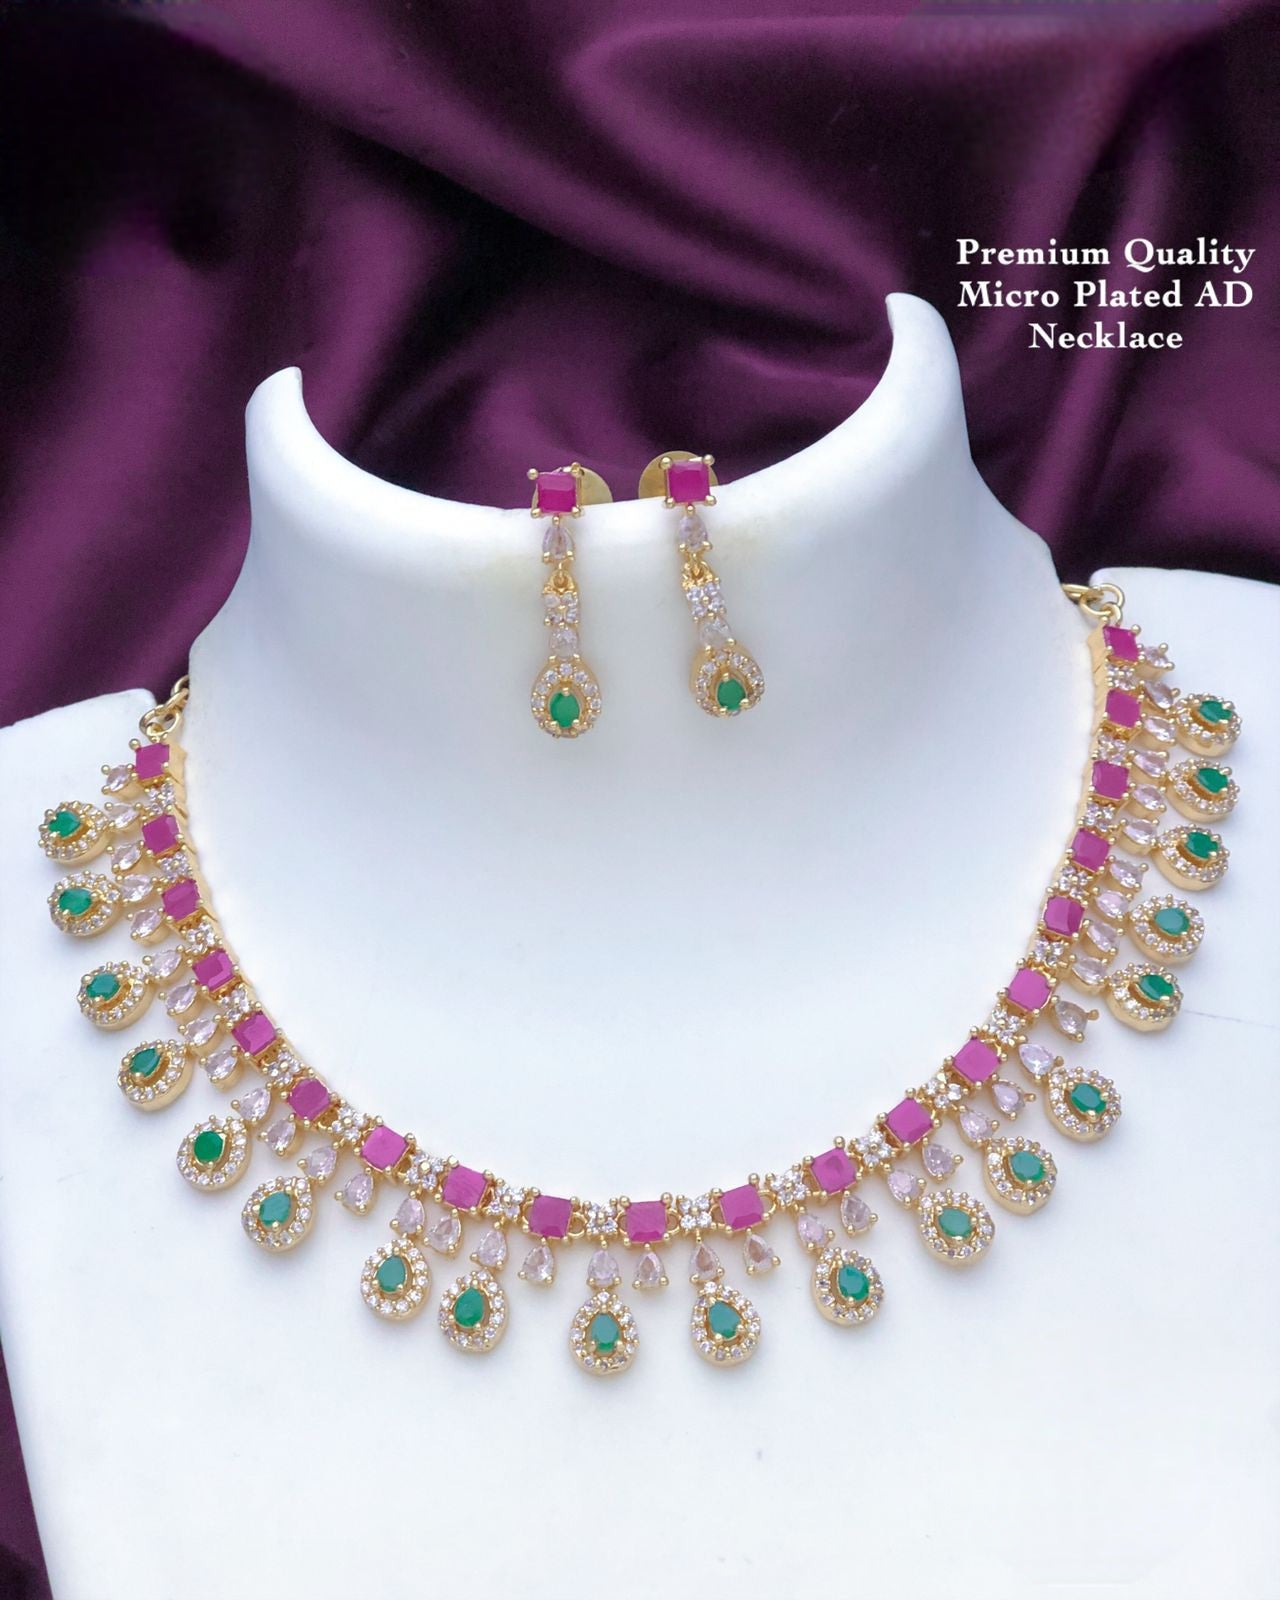 Mothers Day Gift For her|American Diamond Ruby emerald Teardrop necklace|South Indian style CZ AD diamond choker Necklace|Statement Necklace